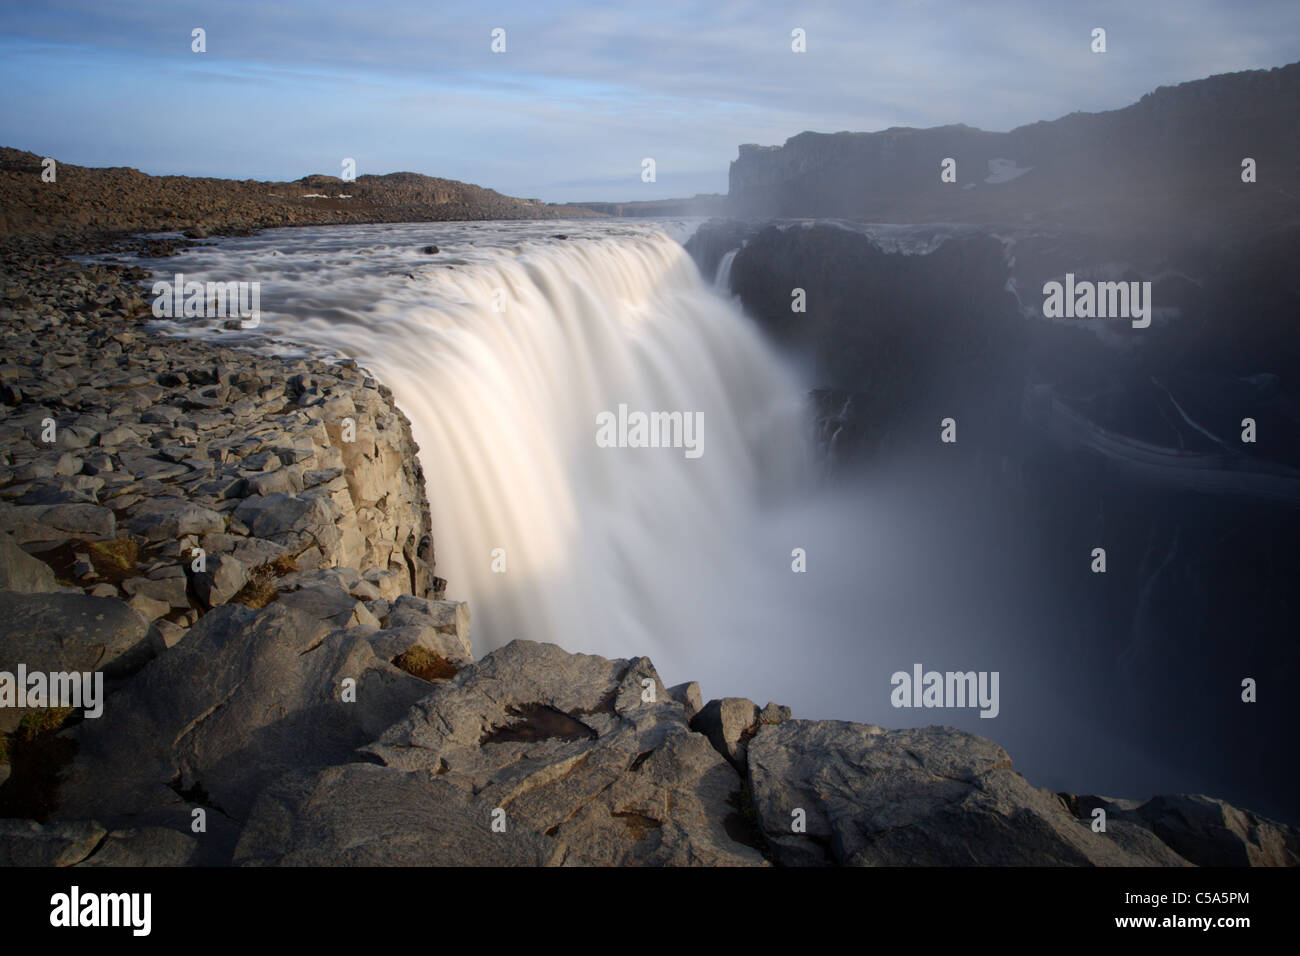 Dettifoss, most powerful waterfall in Europe, Iceland. Stock Photo